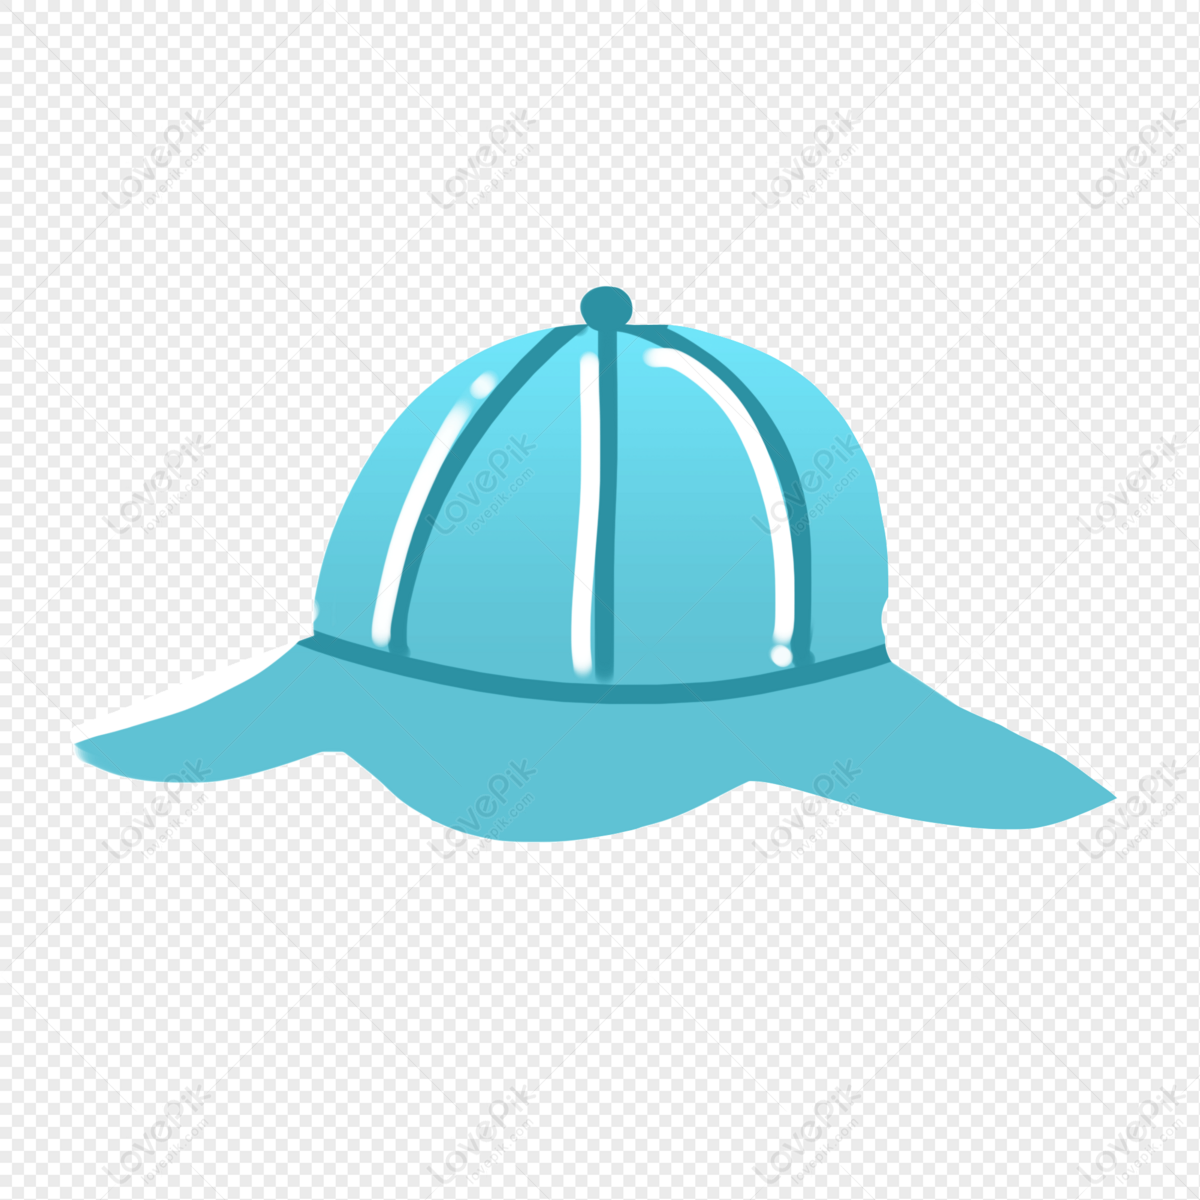 painters hat clipart free